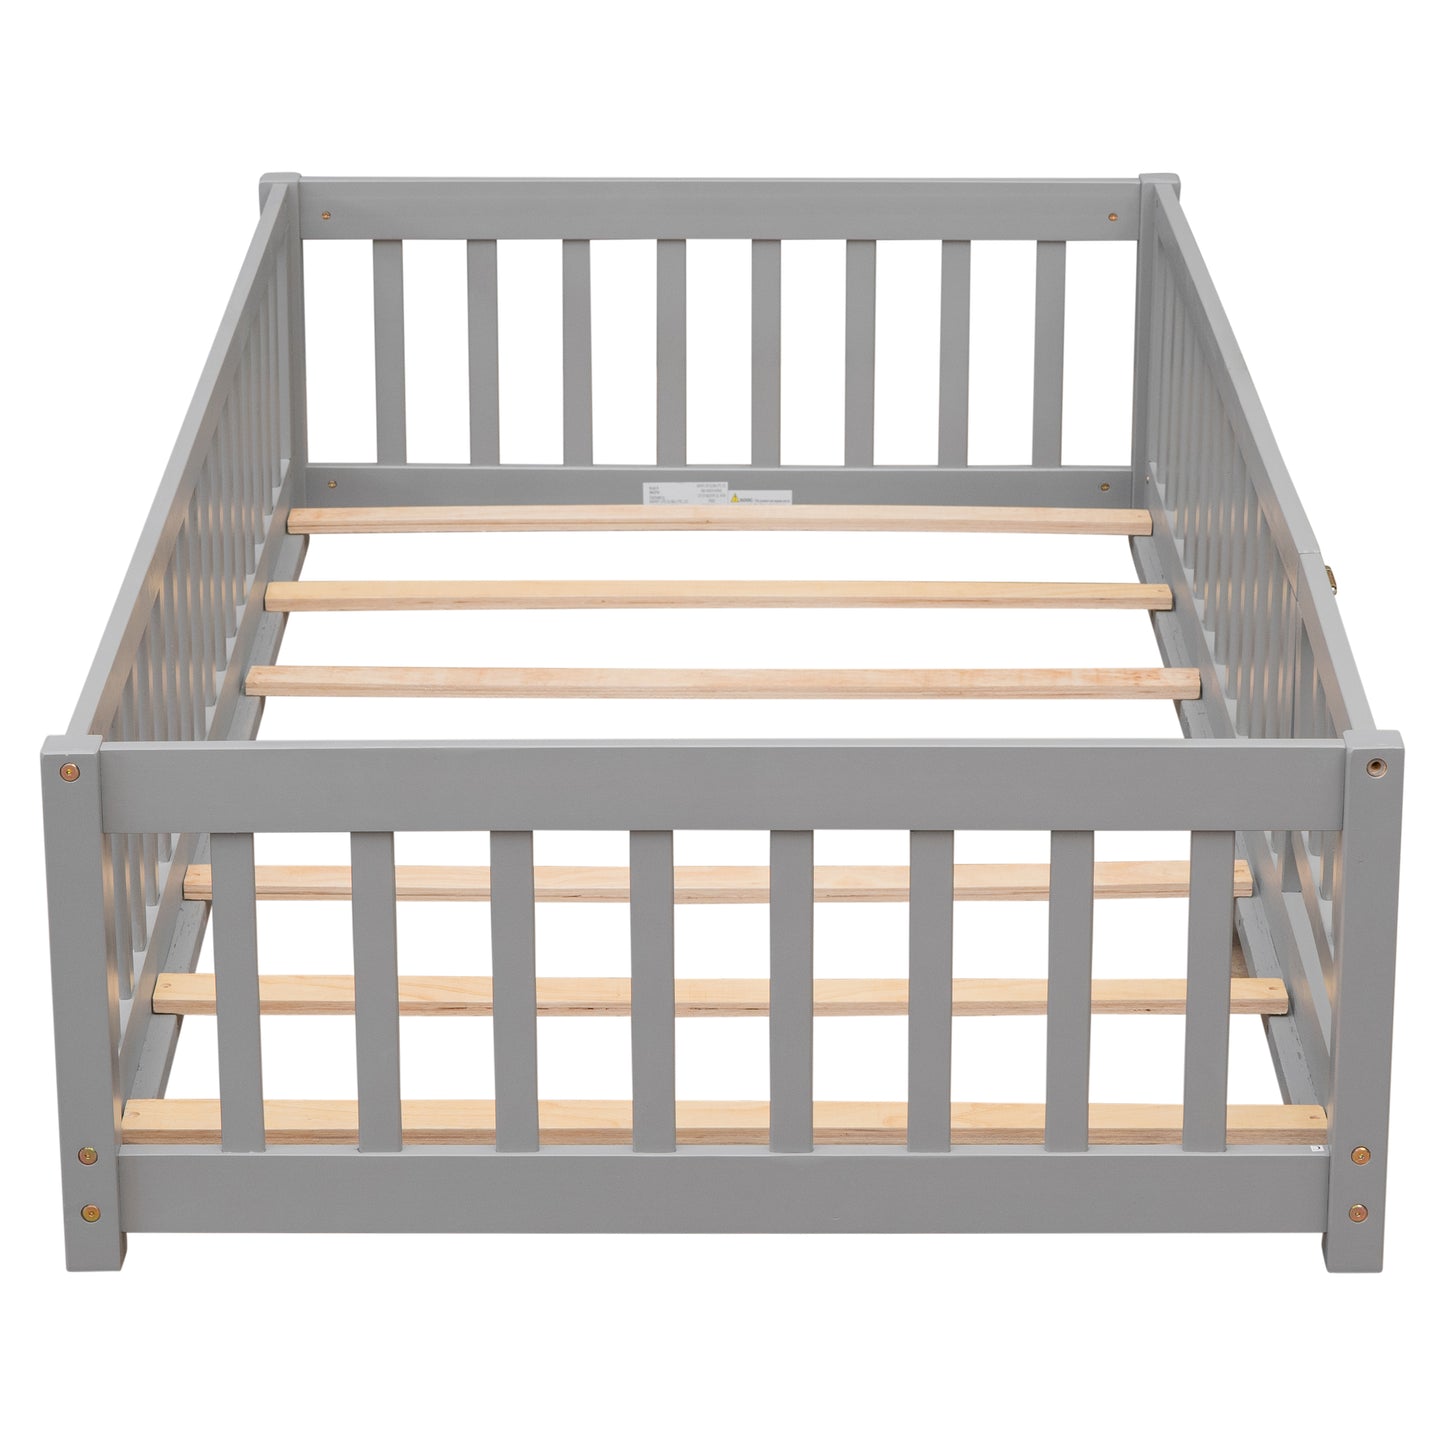 HSUNNS Twin Size Daybed Frame for Toddlers Kids, Twin Floor Bed with Fence Rails and Closable Door, Twin Size Platform Bed Playhouse Bed for Boys Girls, No Box Spring Needed, Easy Assembly, Gray